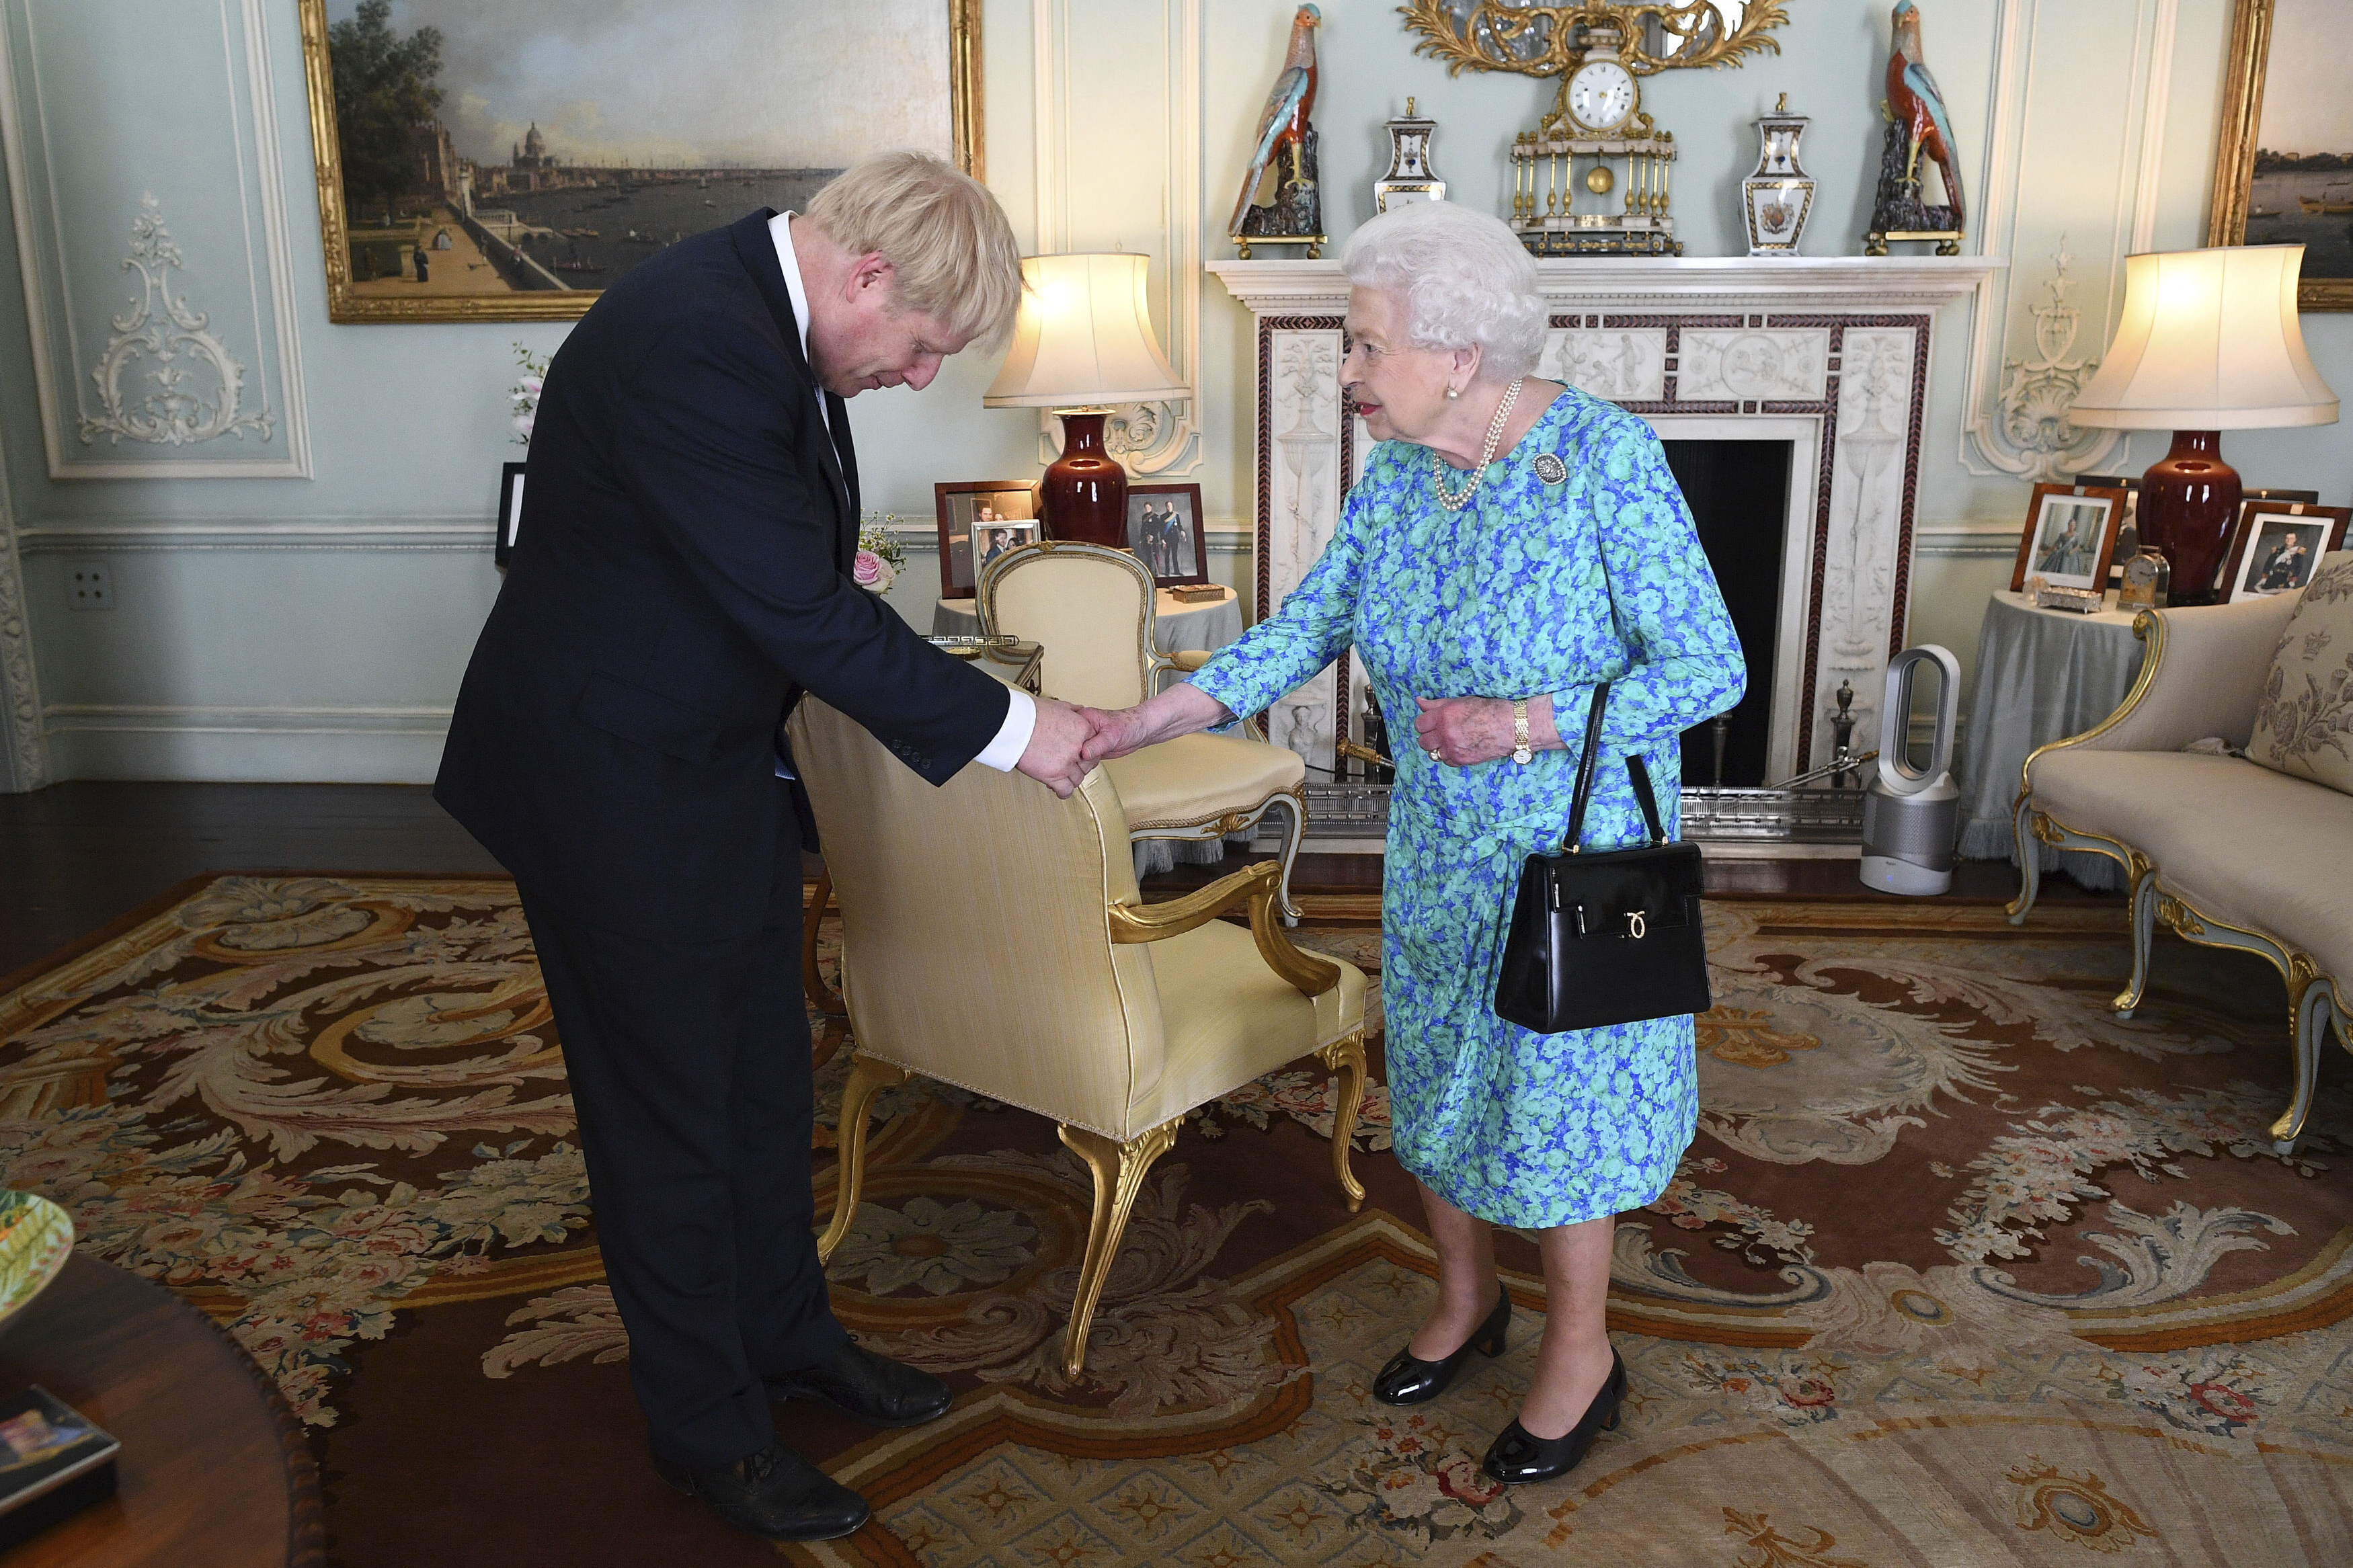 FILE - Britain's Queen Elizabeth II welcomes newly elected leader of the Conservative party Boris Johnson during an audience at Buckingham Palace, London, on July 24, 2019, where she invited him to become prime minister and form a new government. (Victoria Jones/Pool via AP, File)